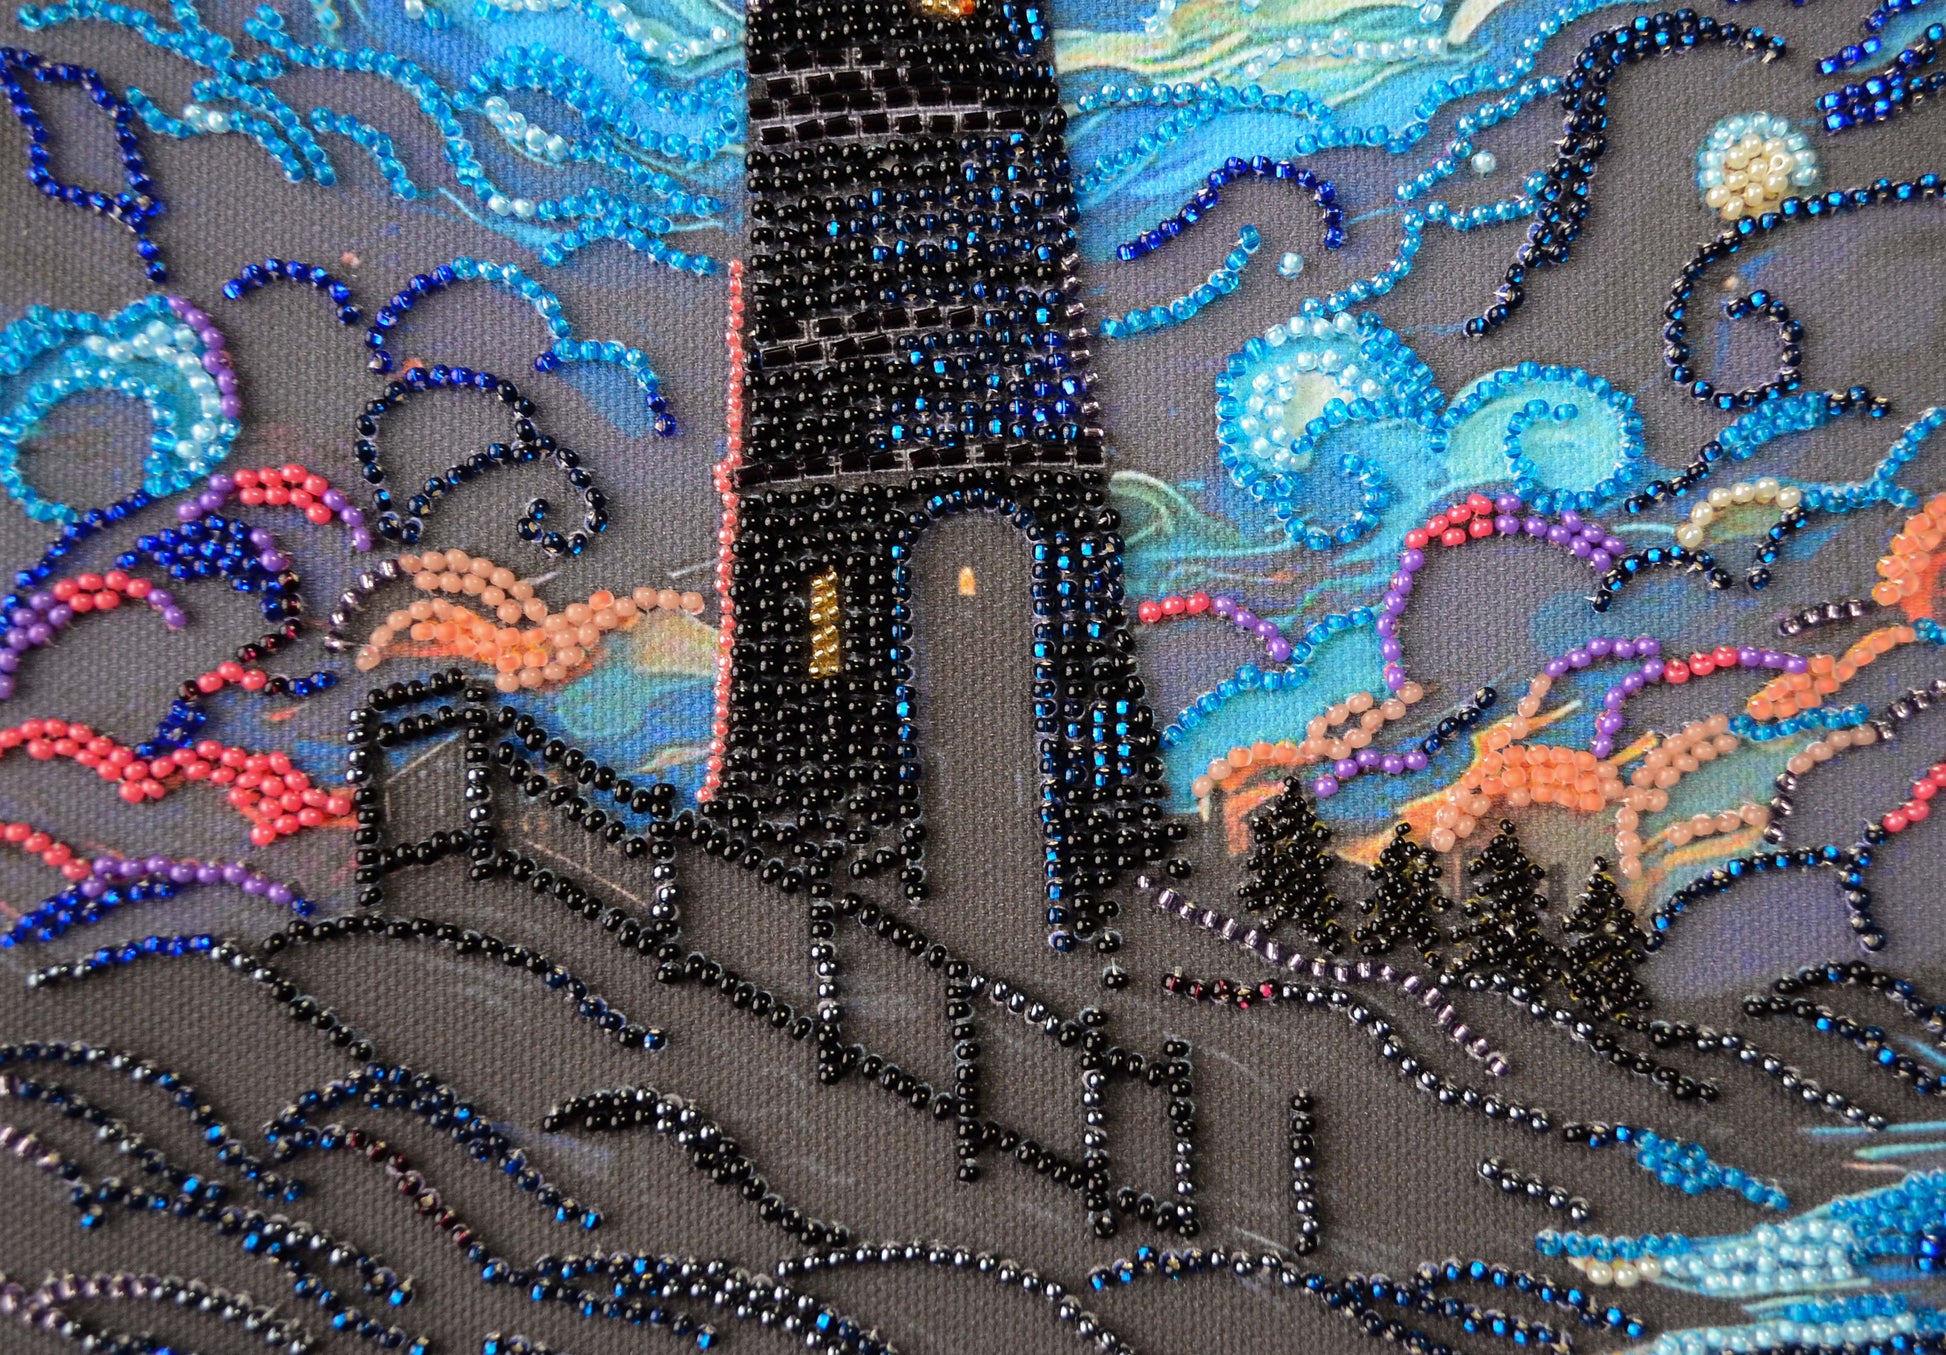 Bead embroidery kit Lighthouse Size: 7.9"×12.6" (20×32 cm)